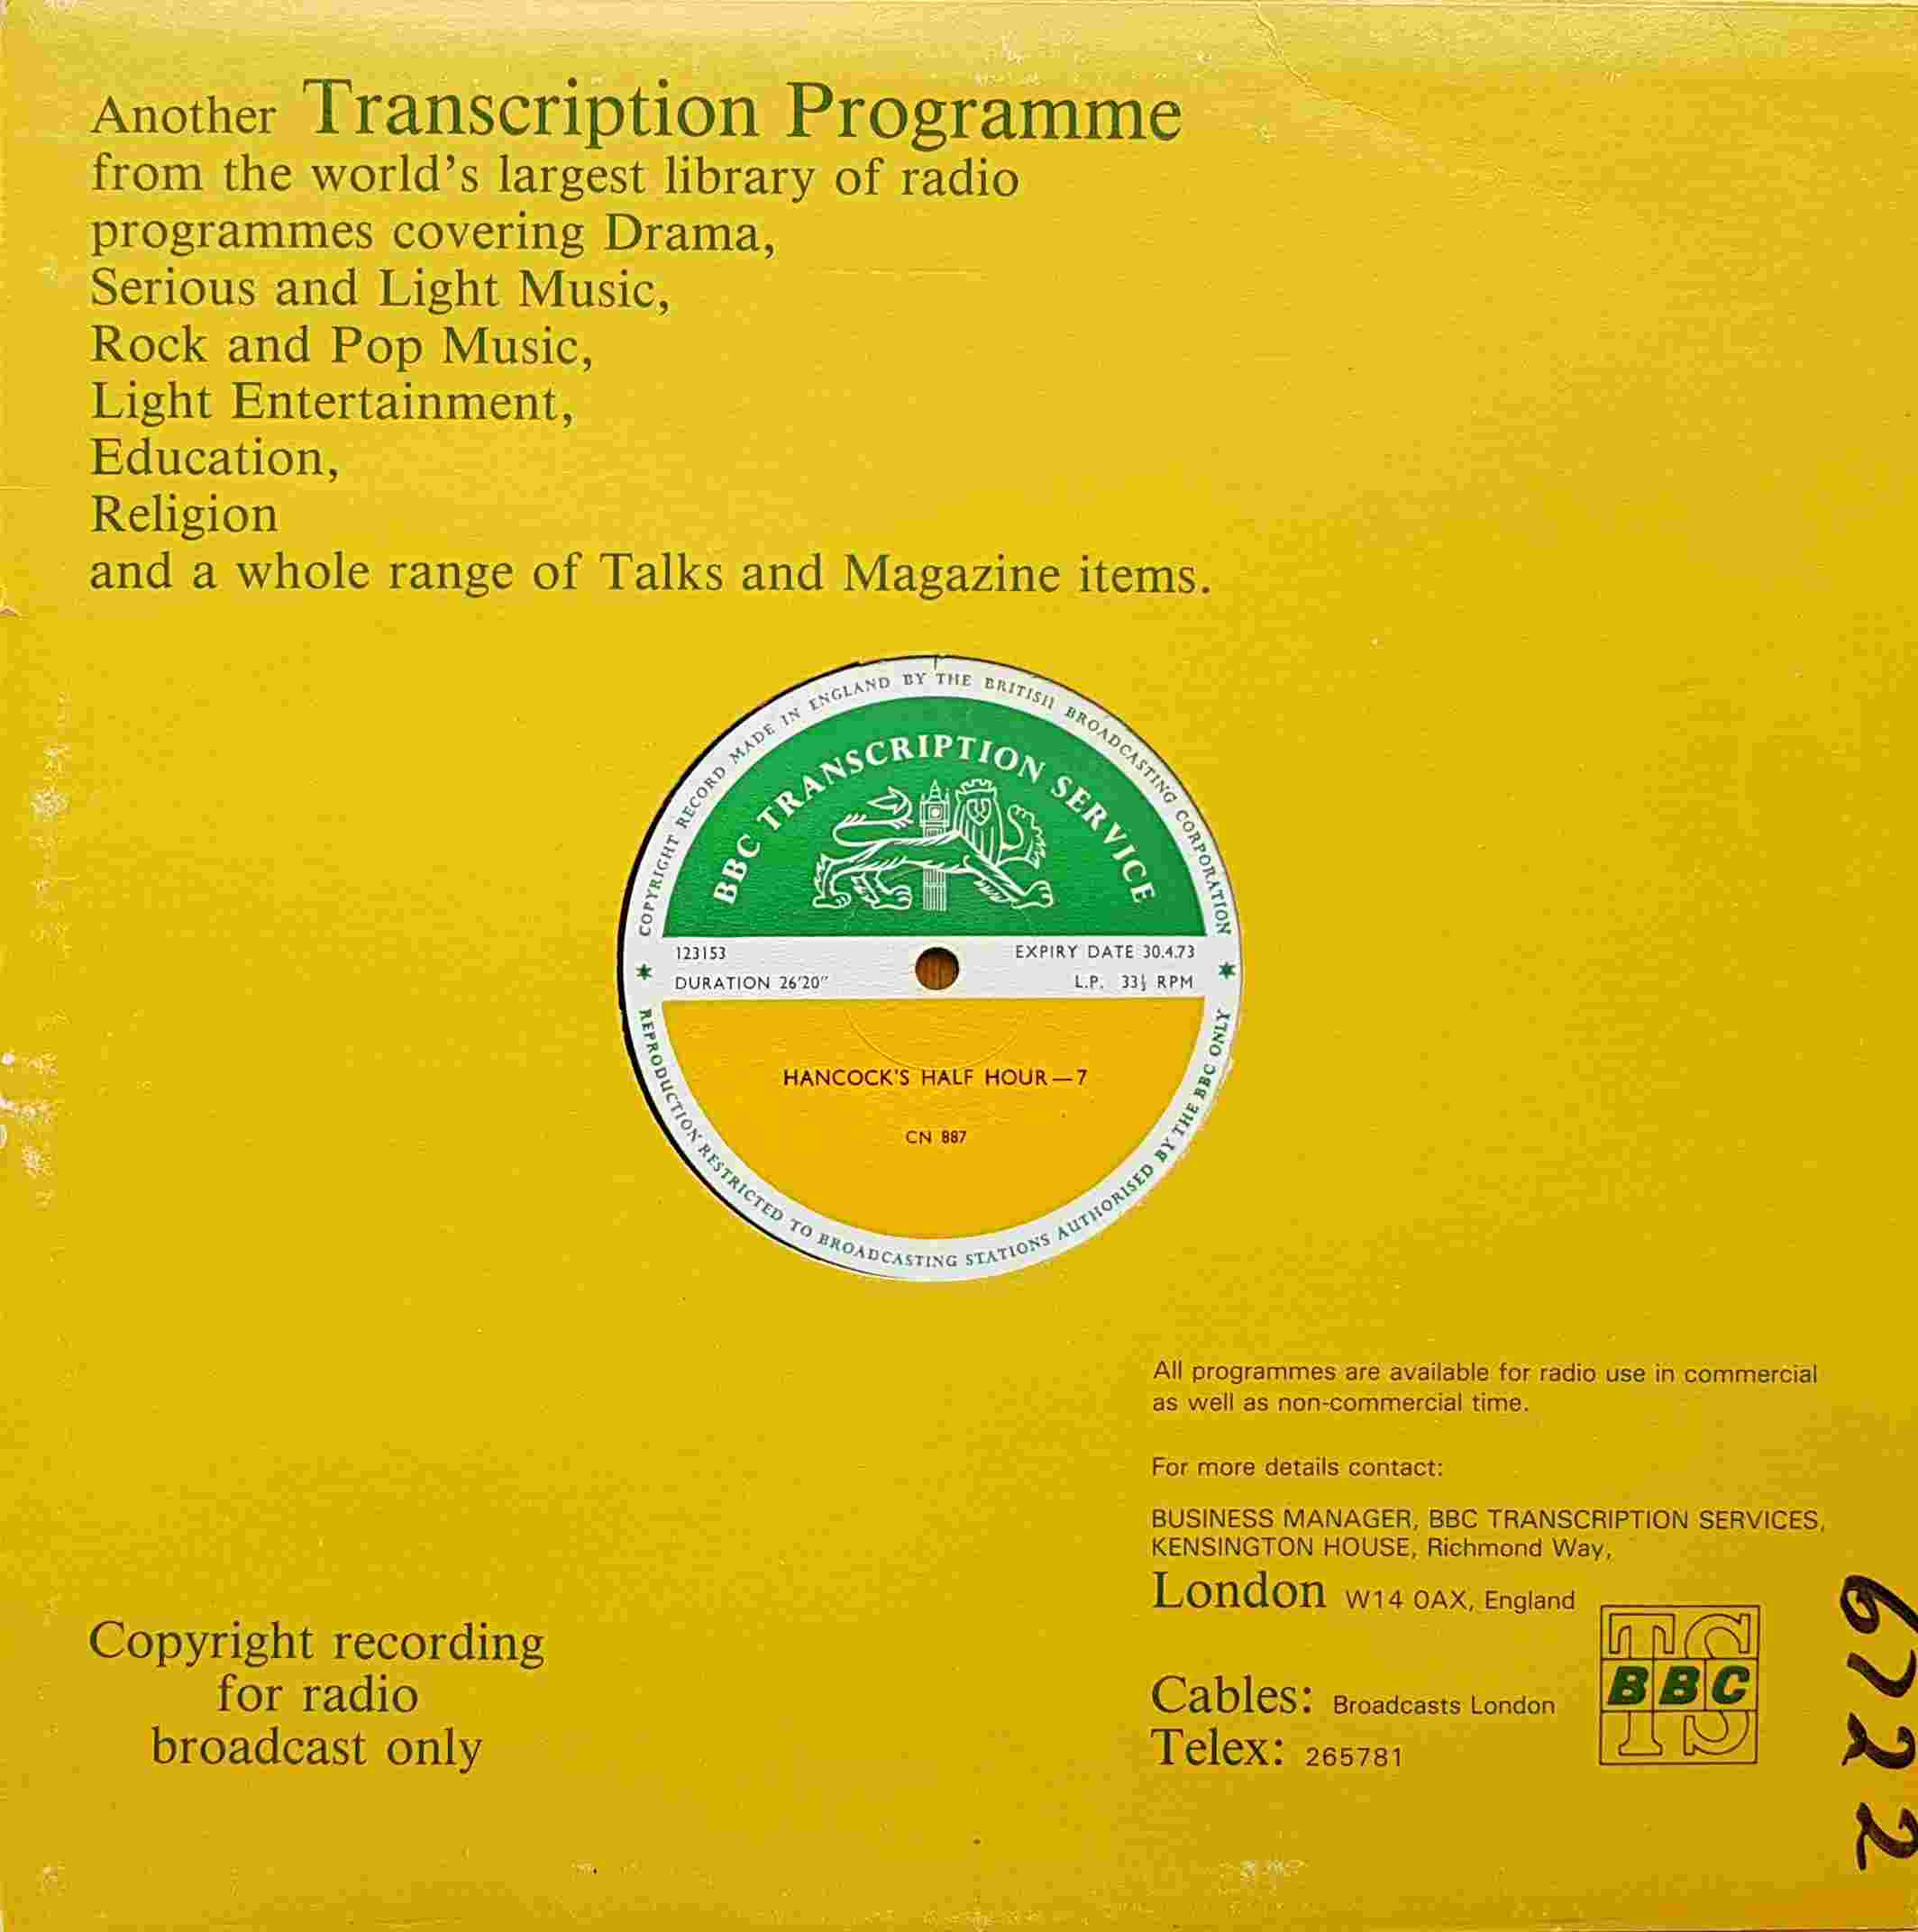 Picture of CN 887 4 Hancock's half hour - 7 & 8 by artist Tony Hancock from the BBC records and Tapes library